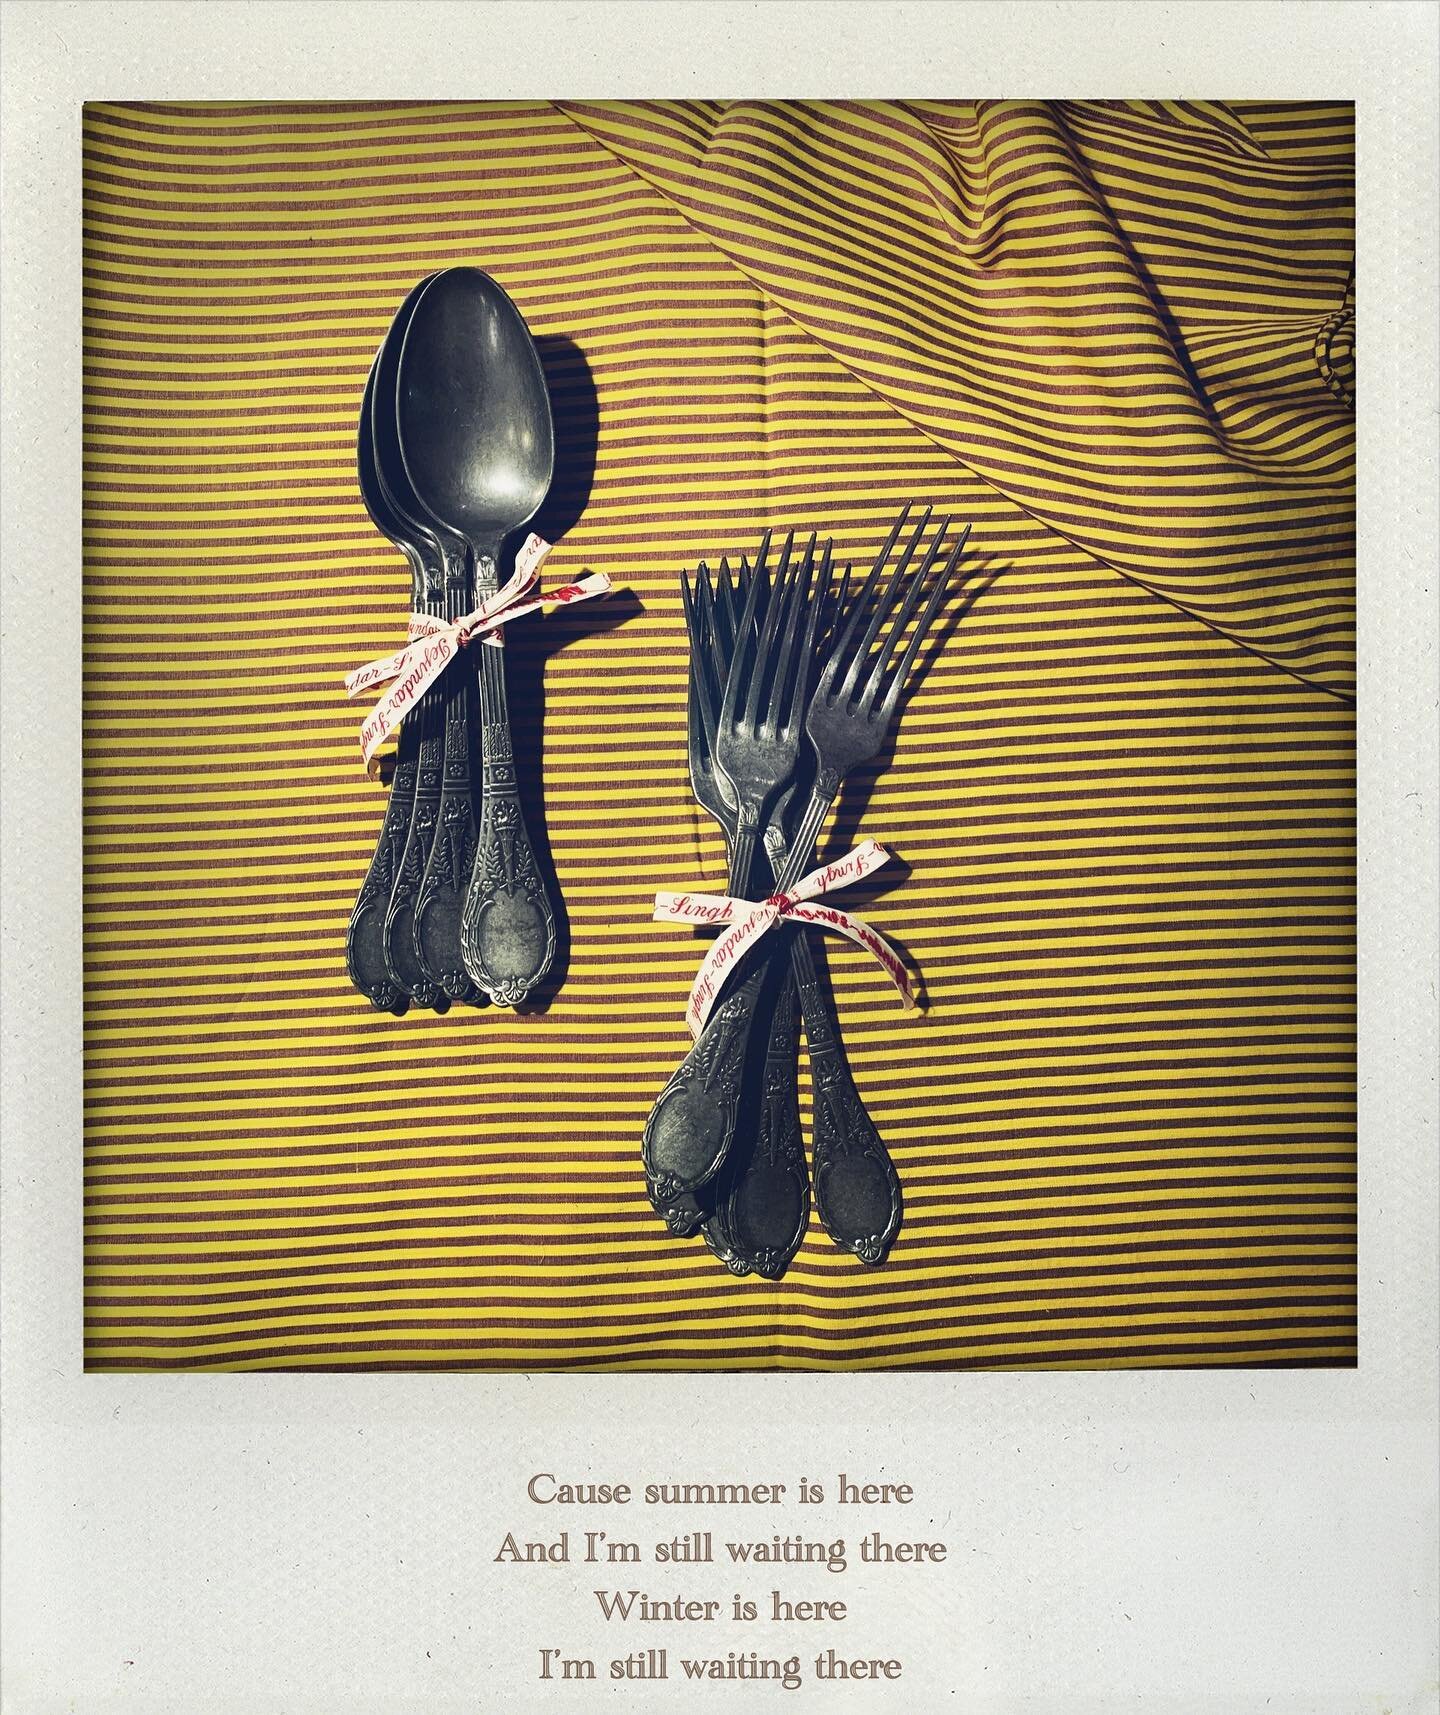 .
.
.
.
.
Art by @anonivv 

#280siolim #polaroid #vintage #pewter #embosed #forks #spoons #reclaimed #selvedge #waitinginvain #annielennox